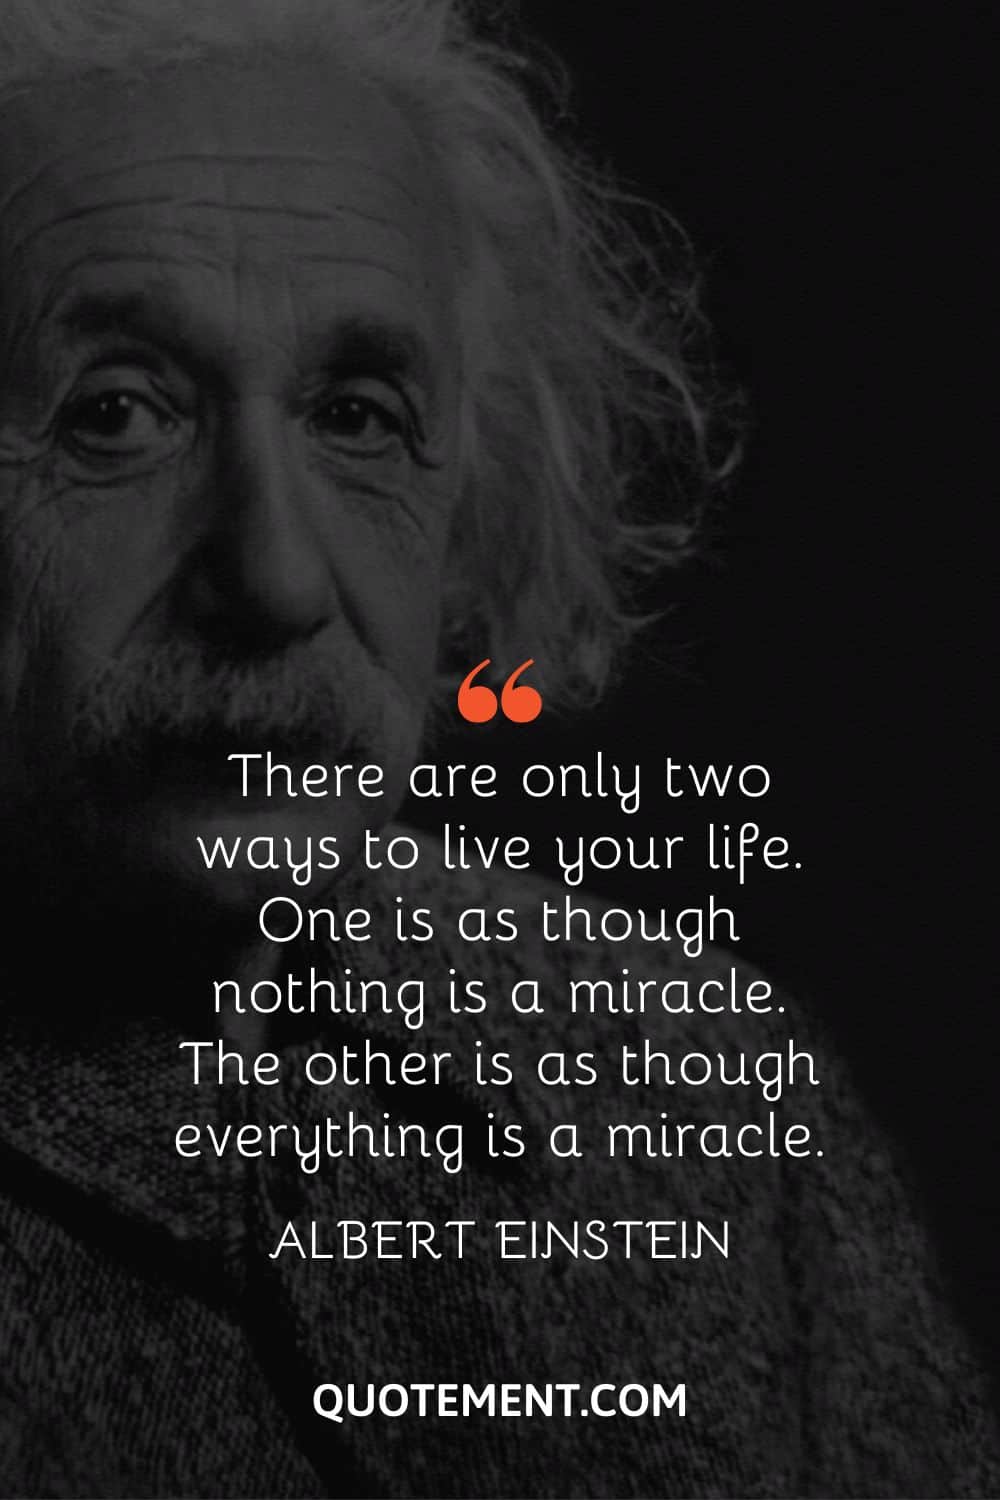 There are only two ways to live your life